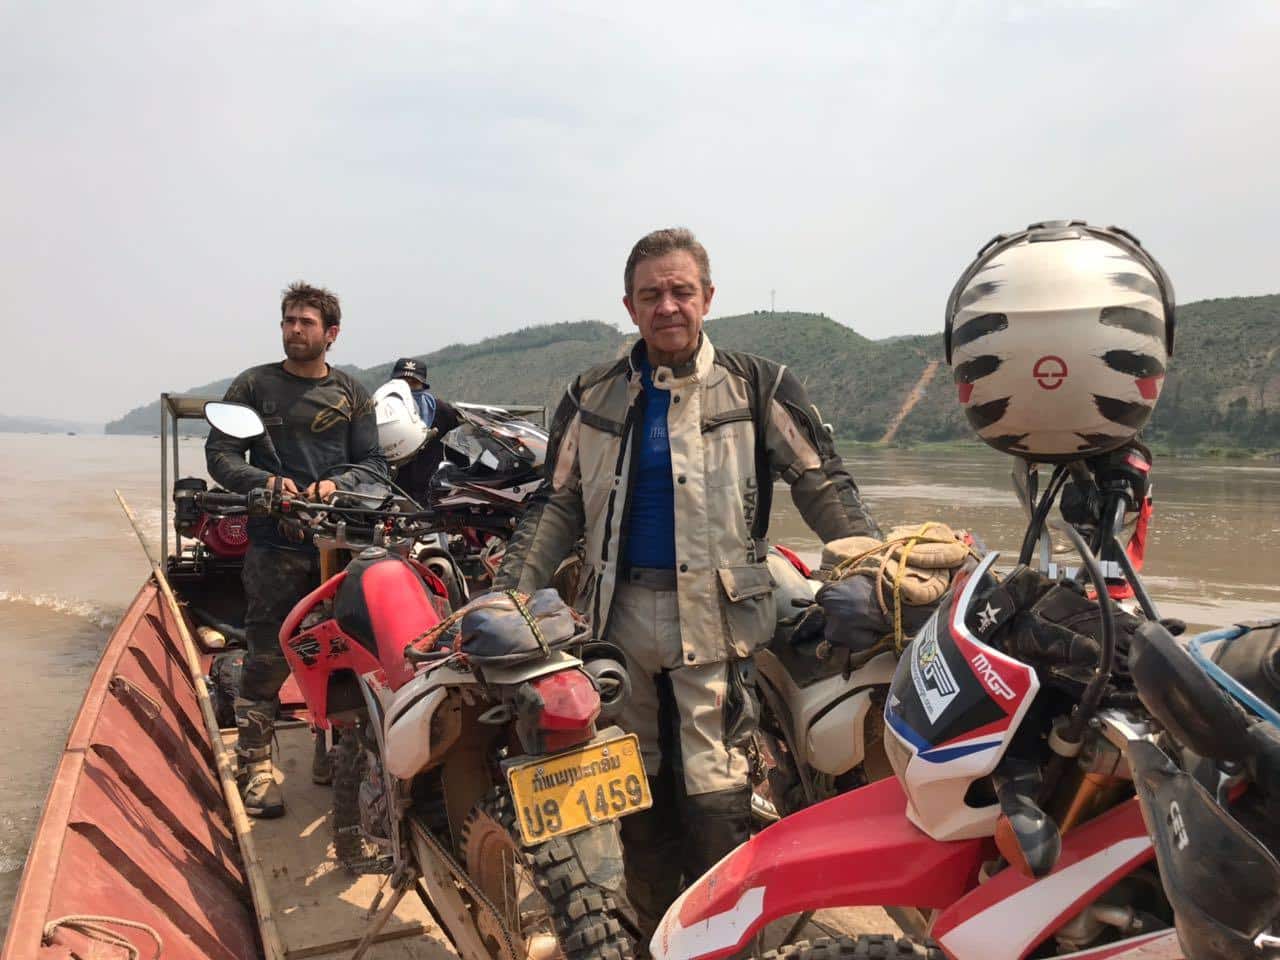 UNSEEN LAOS NORTHERN OFFROAD MOTORCYCLE TOUR